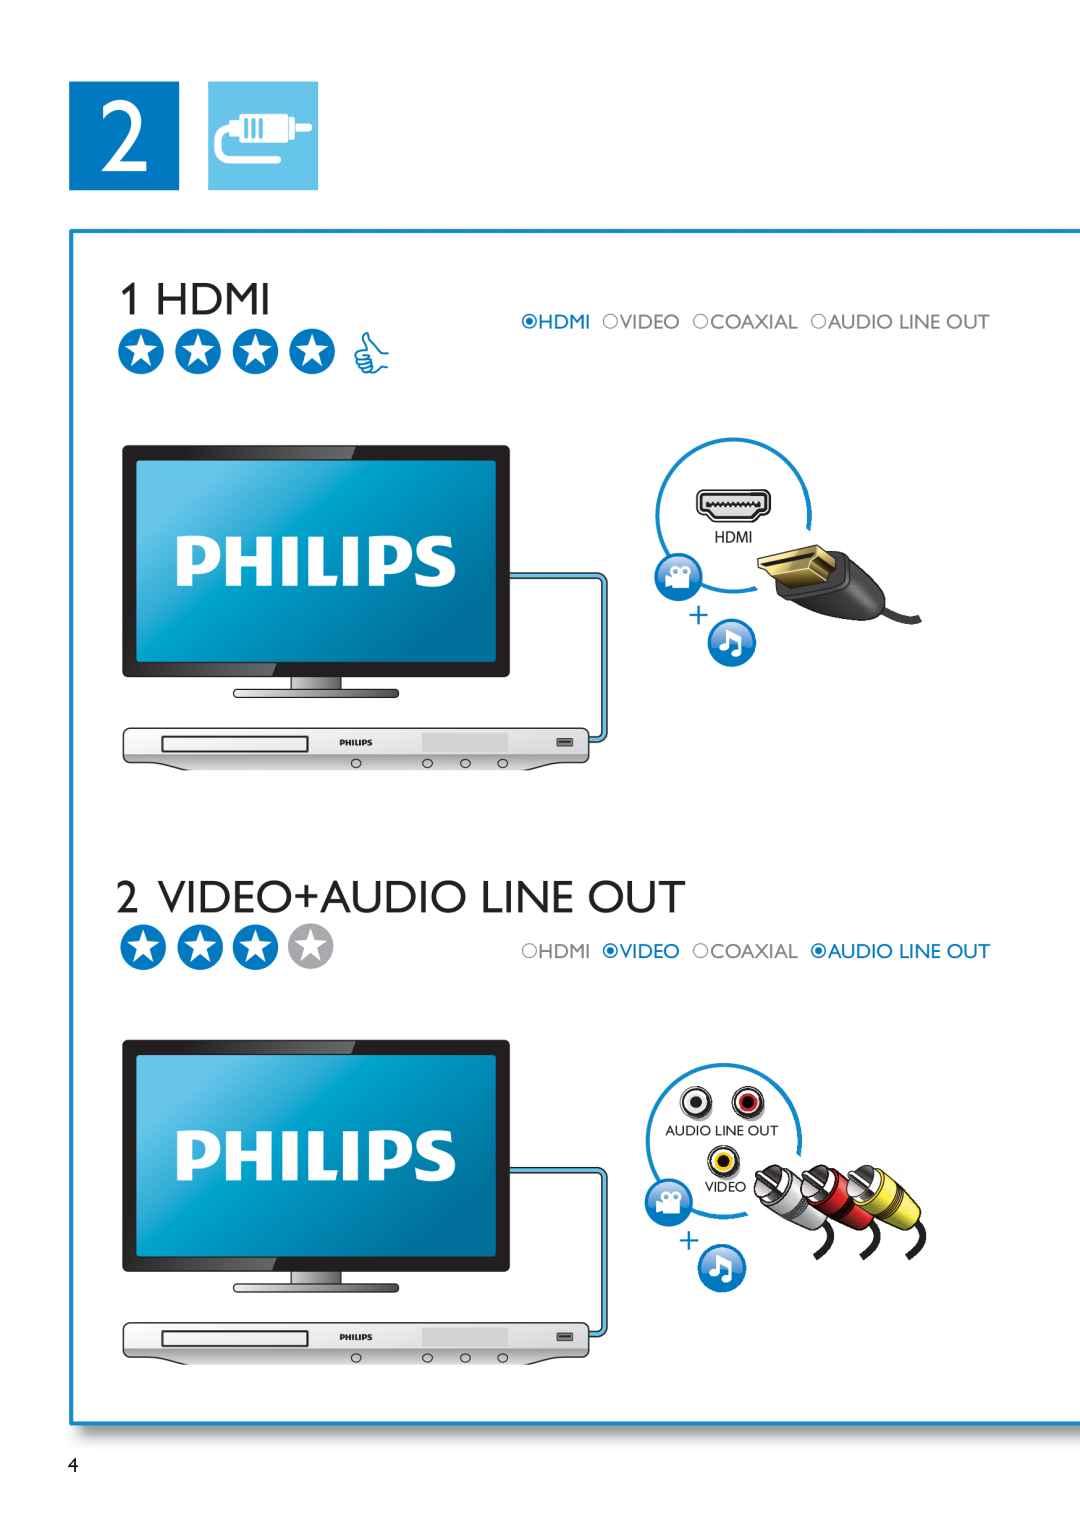 Philips BDP5200 user manual Video+Audio Line Out, Hdmi Video Coaxial Audio Line Out, Audio Line Out Video 